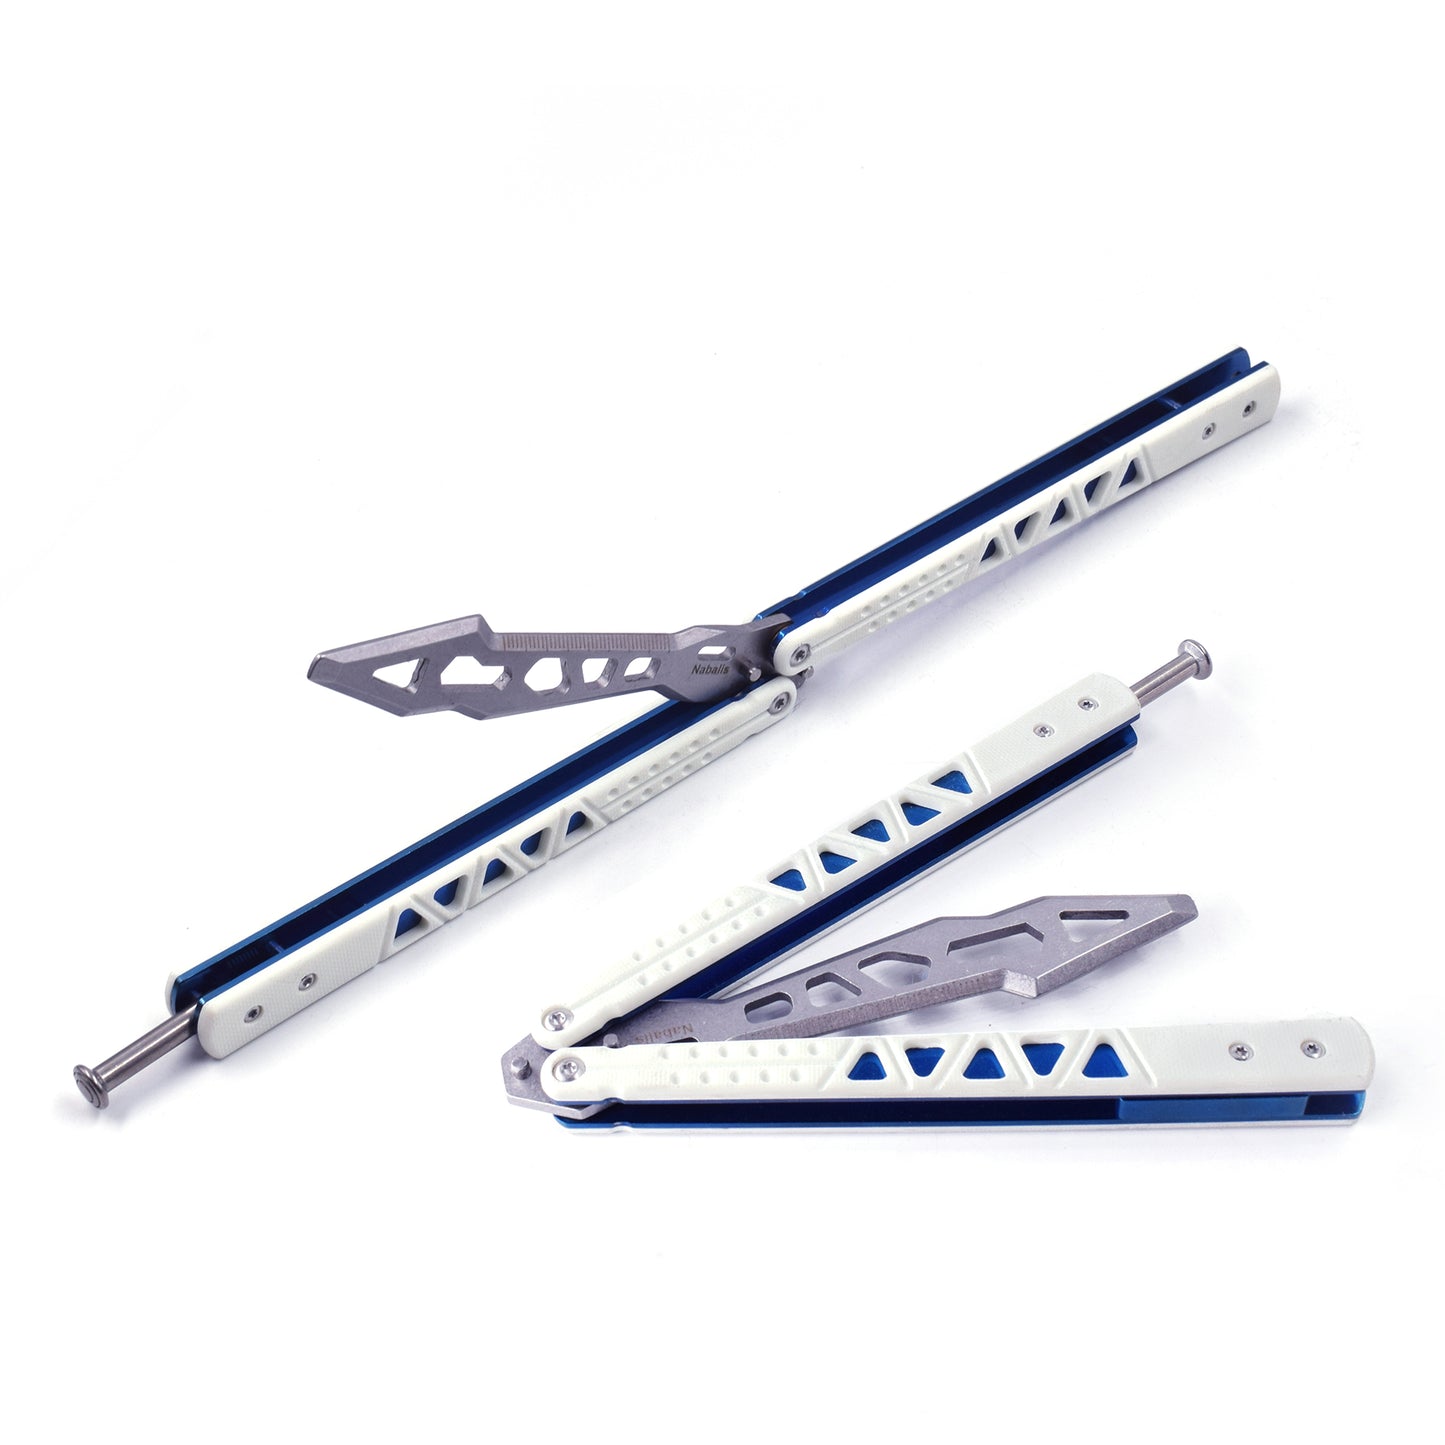 Nabalis G10 Balisong Butterfly Knife Trainer-Lightweight-White-Close and Open